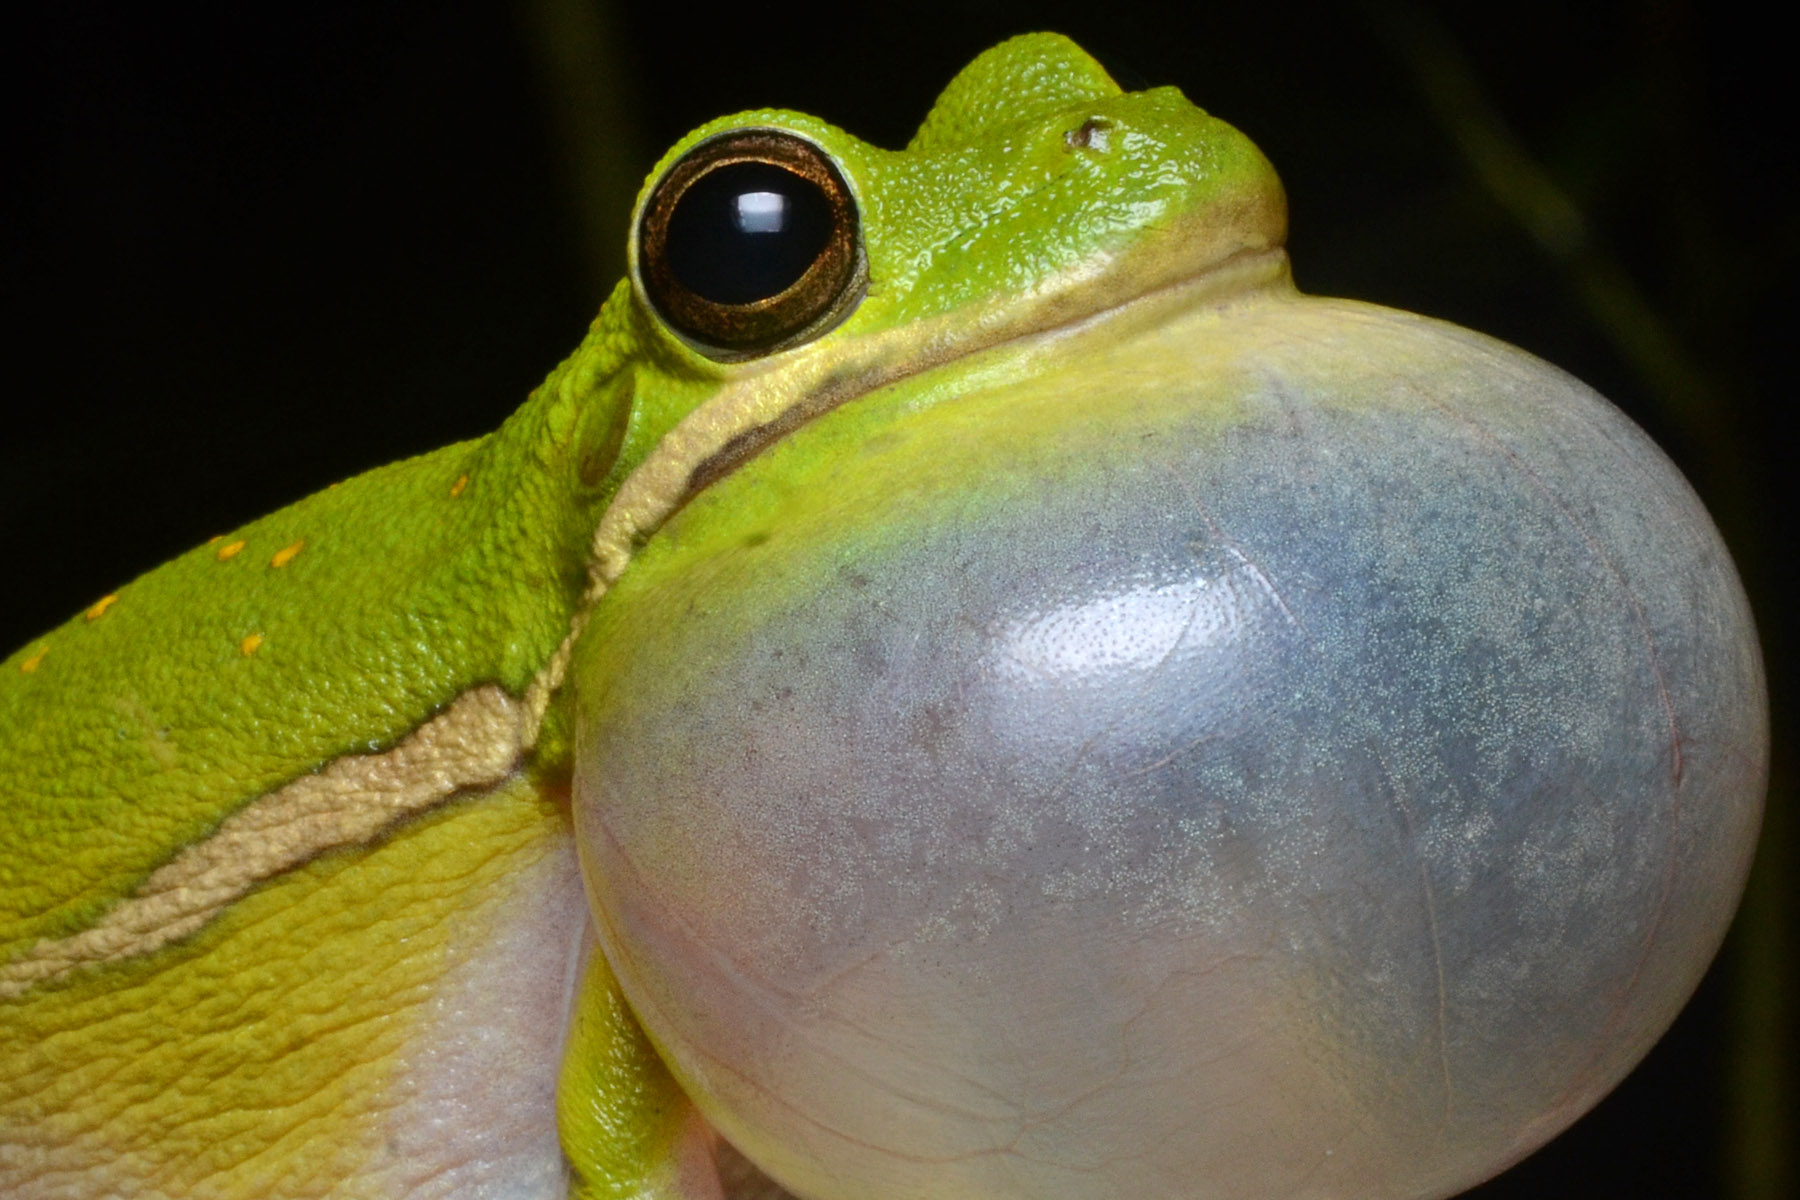 Why do frogs croak at night?